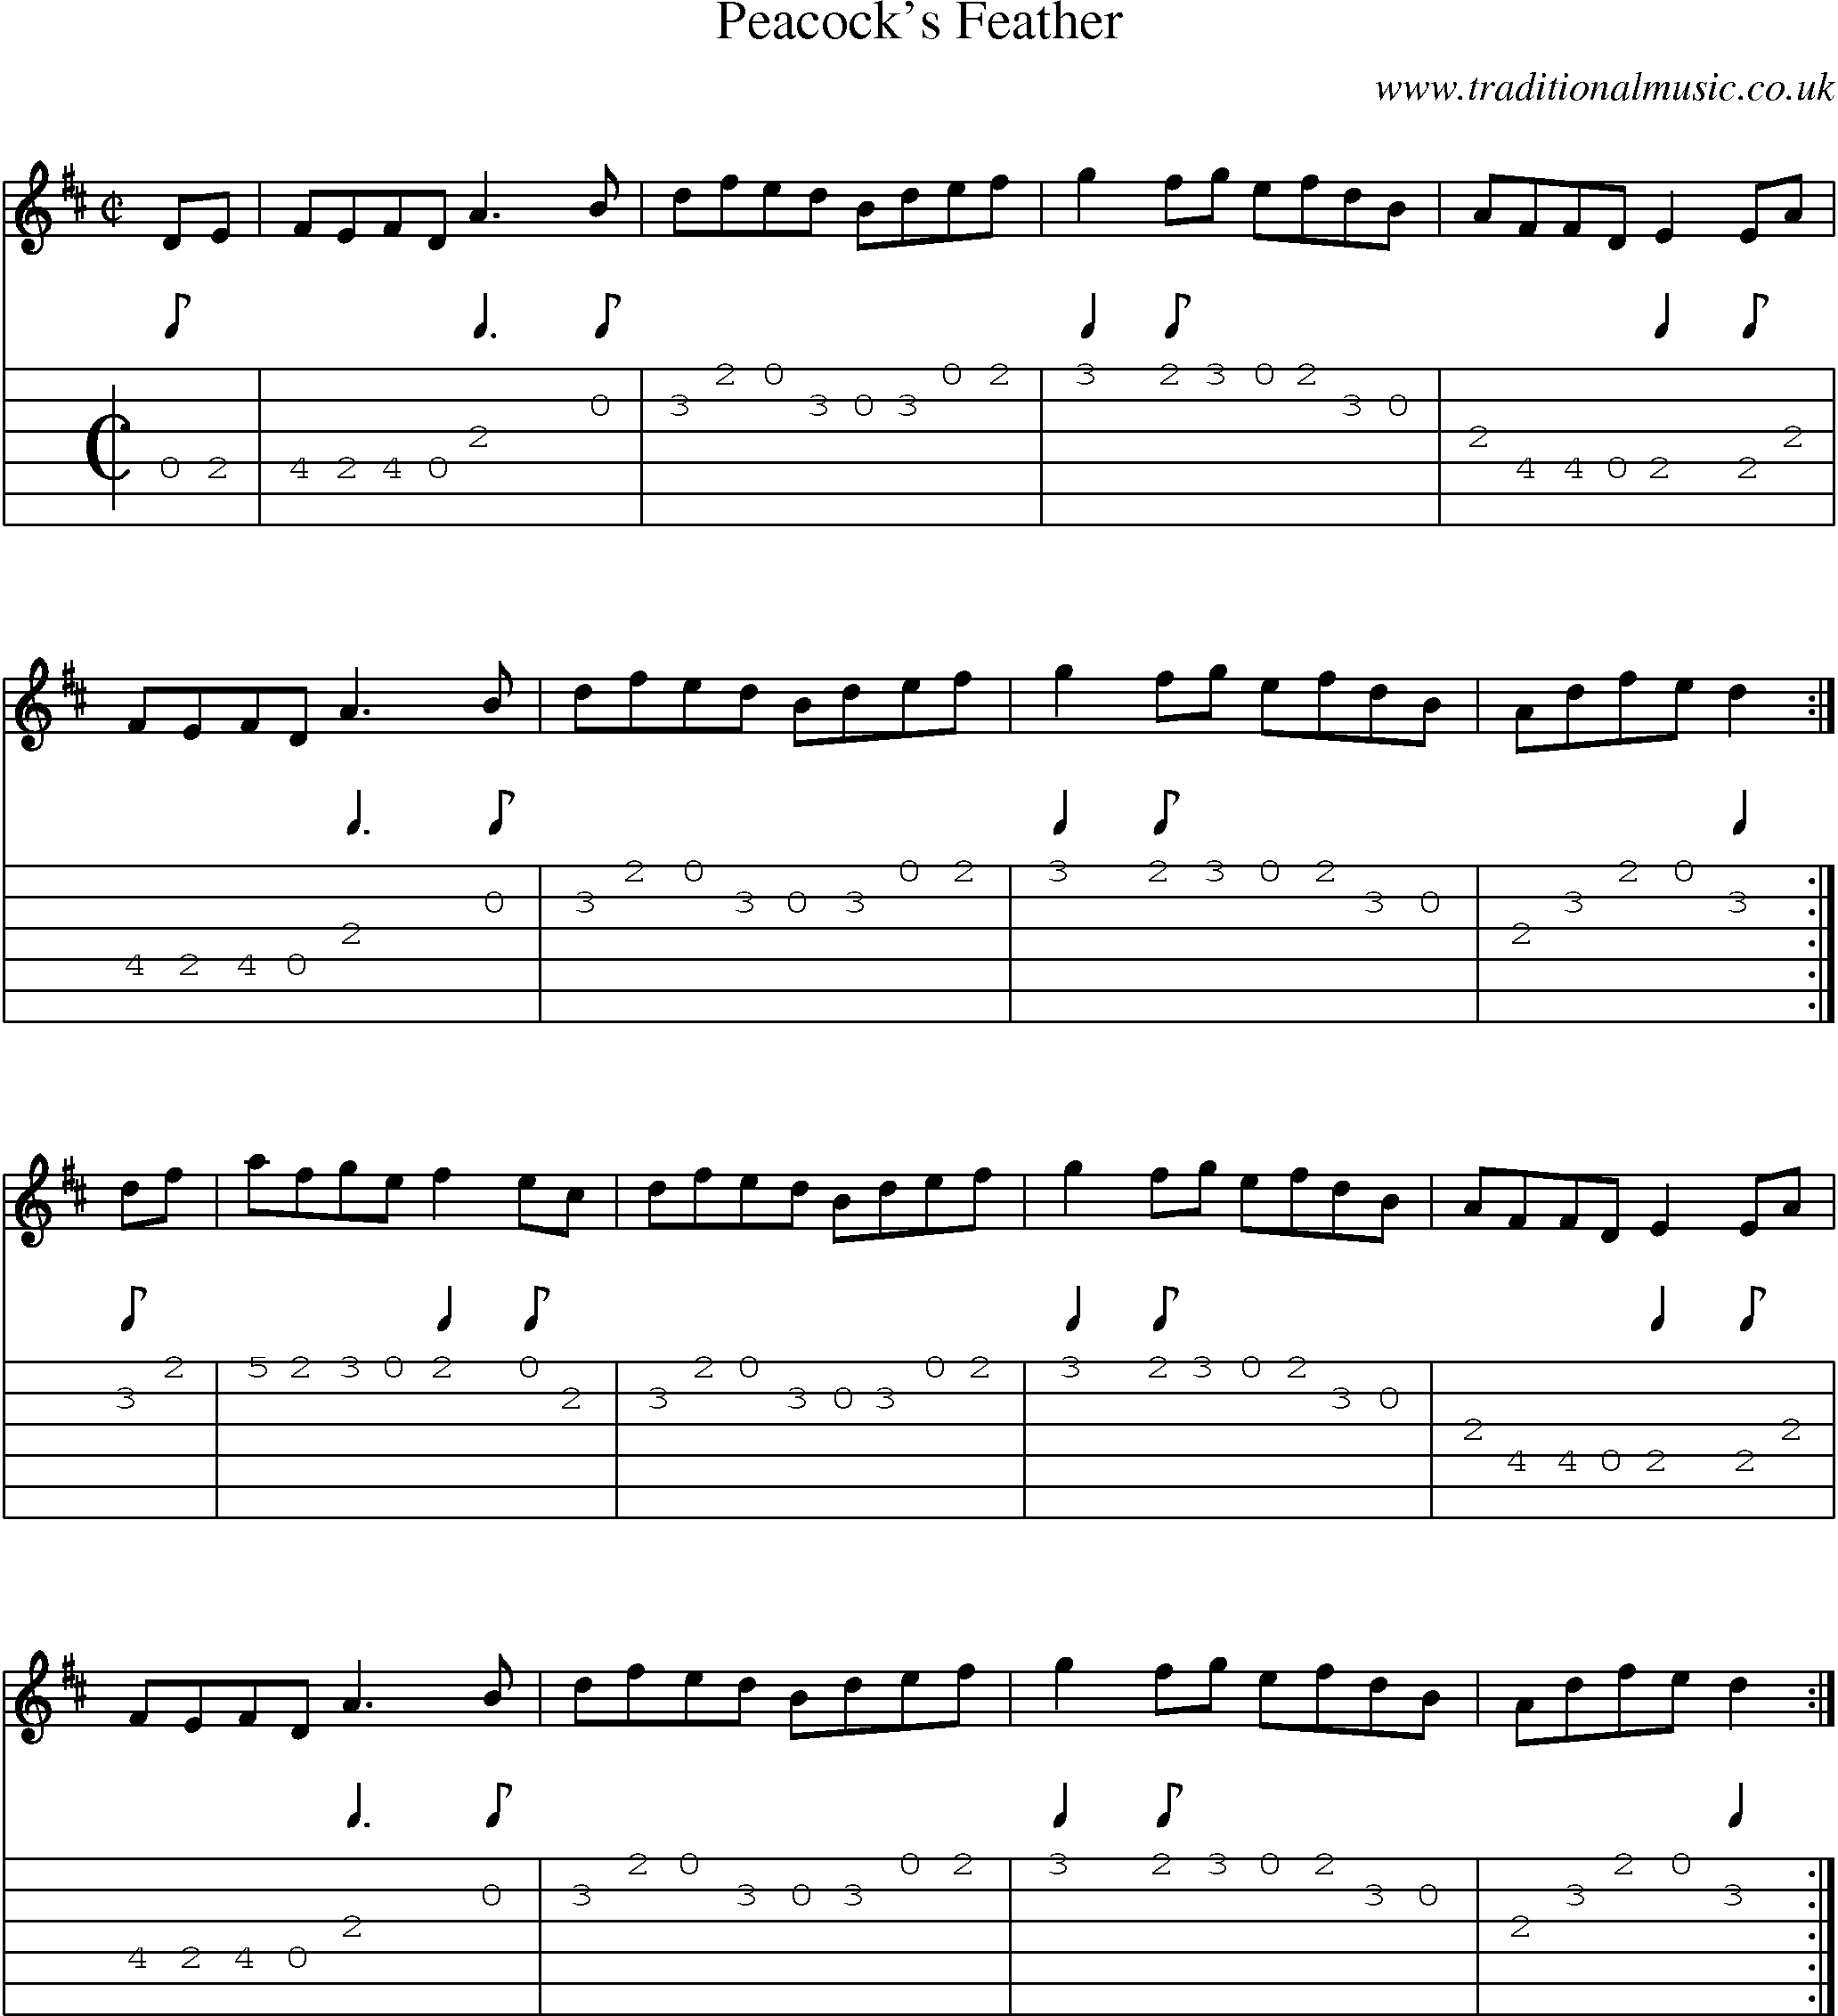 Music Score and Guitar Tabs for Peacocks Feather